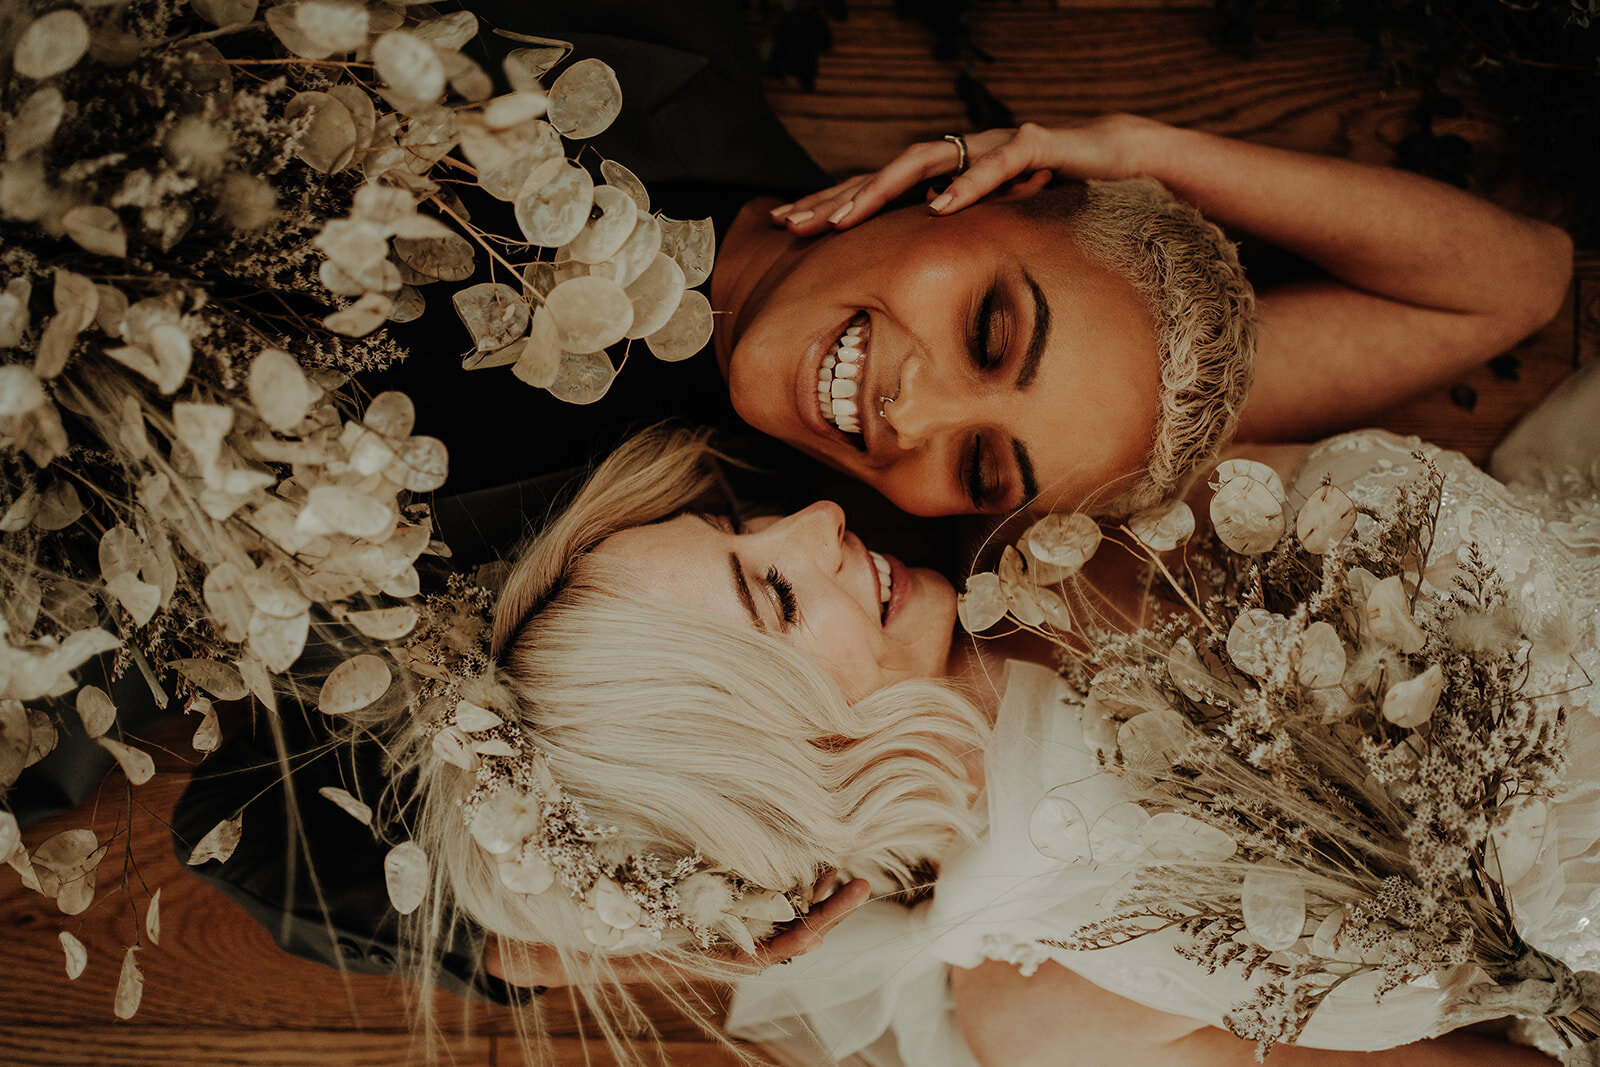 two brides lying opposite ways on floor looking lovingly into each others eyes both holding bouquets romantic alternative wedding photographer scotland